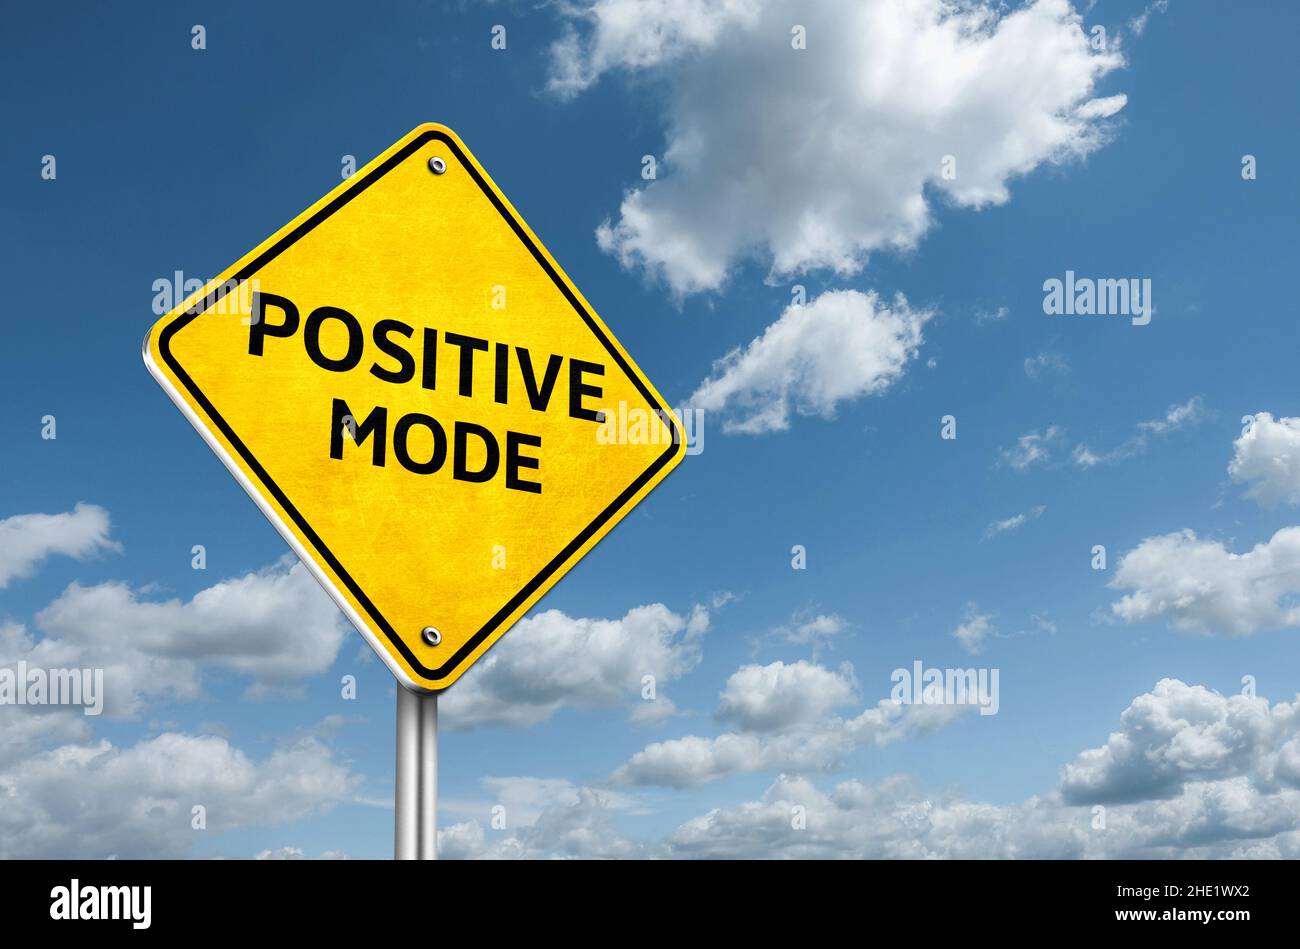 Positive Mode information road sign Stock Photo